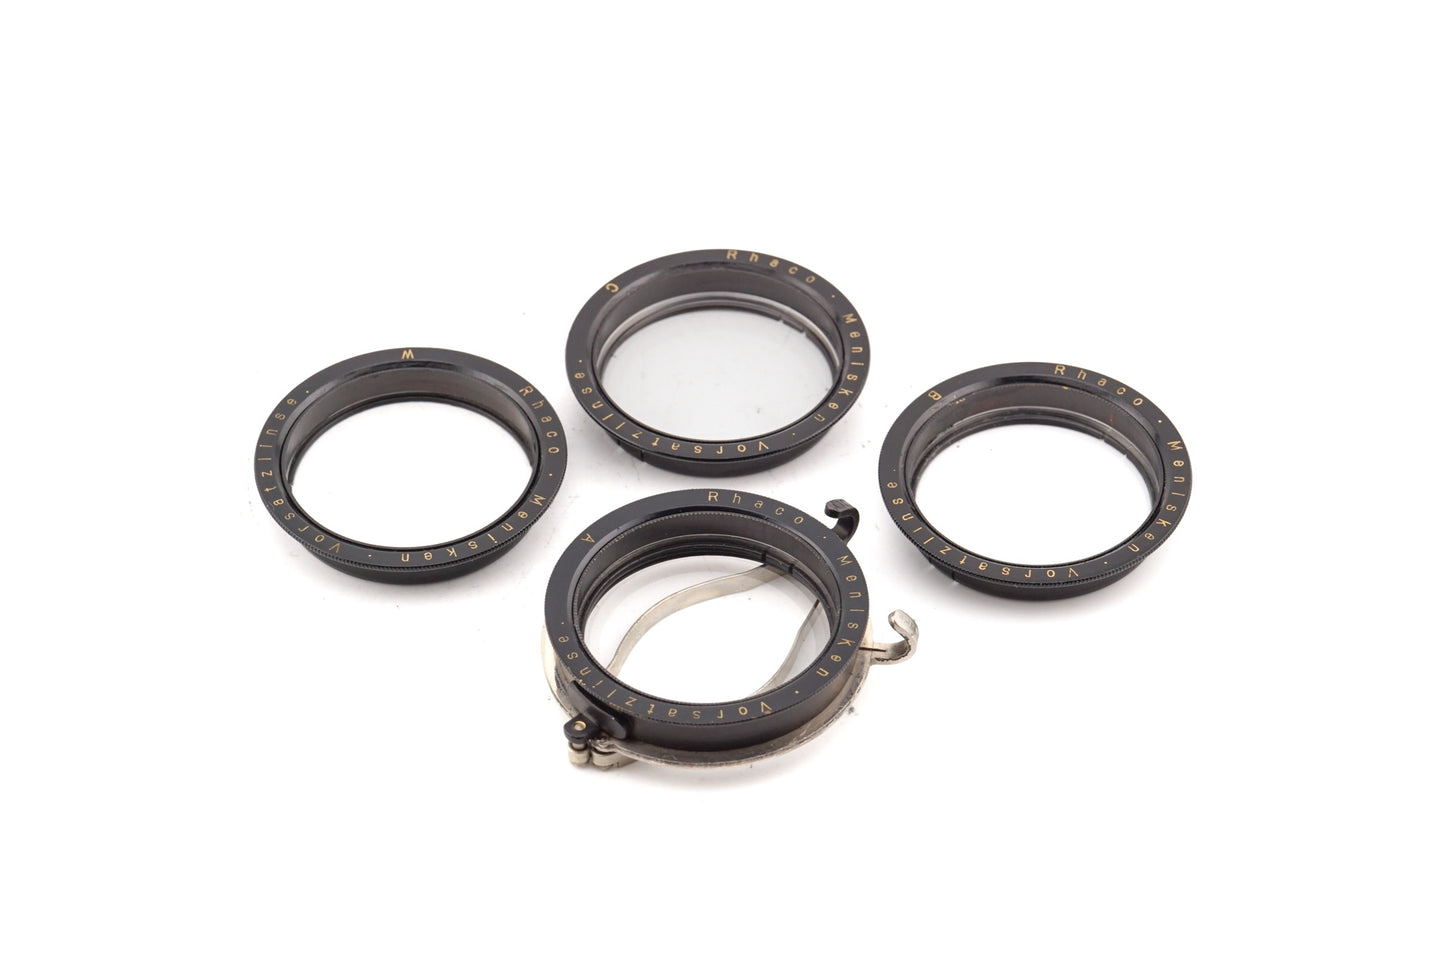 Rhaco 39mm Clip-On Close-Up Filter Set